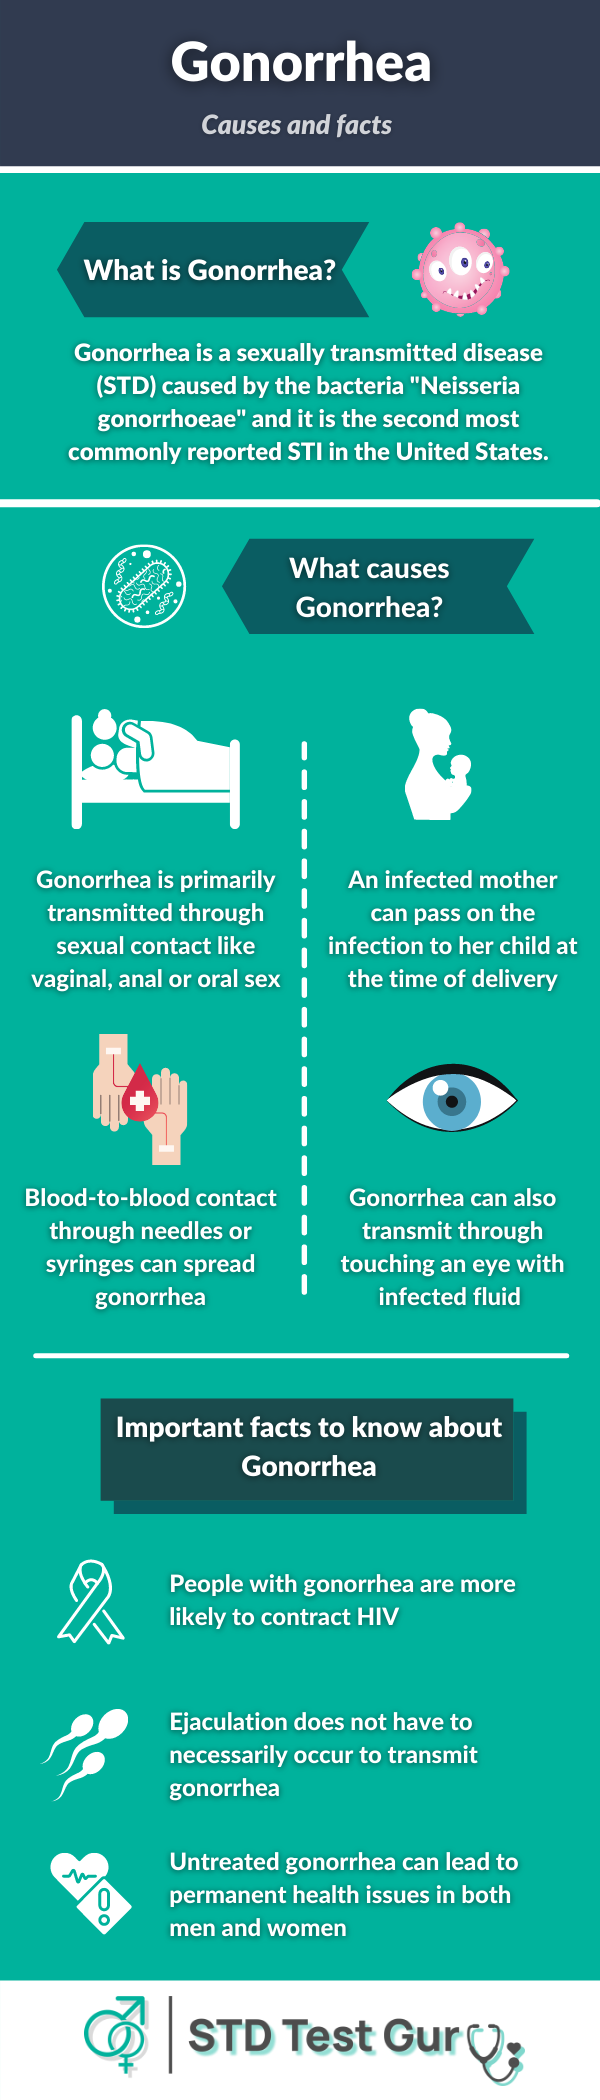 Gonorrhea Causes and Latest Facts